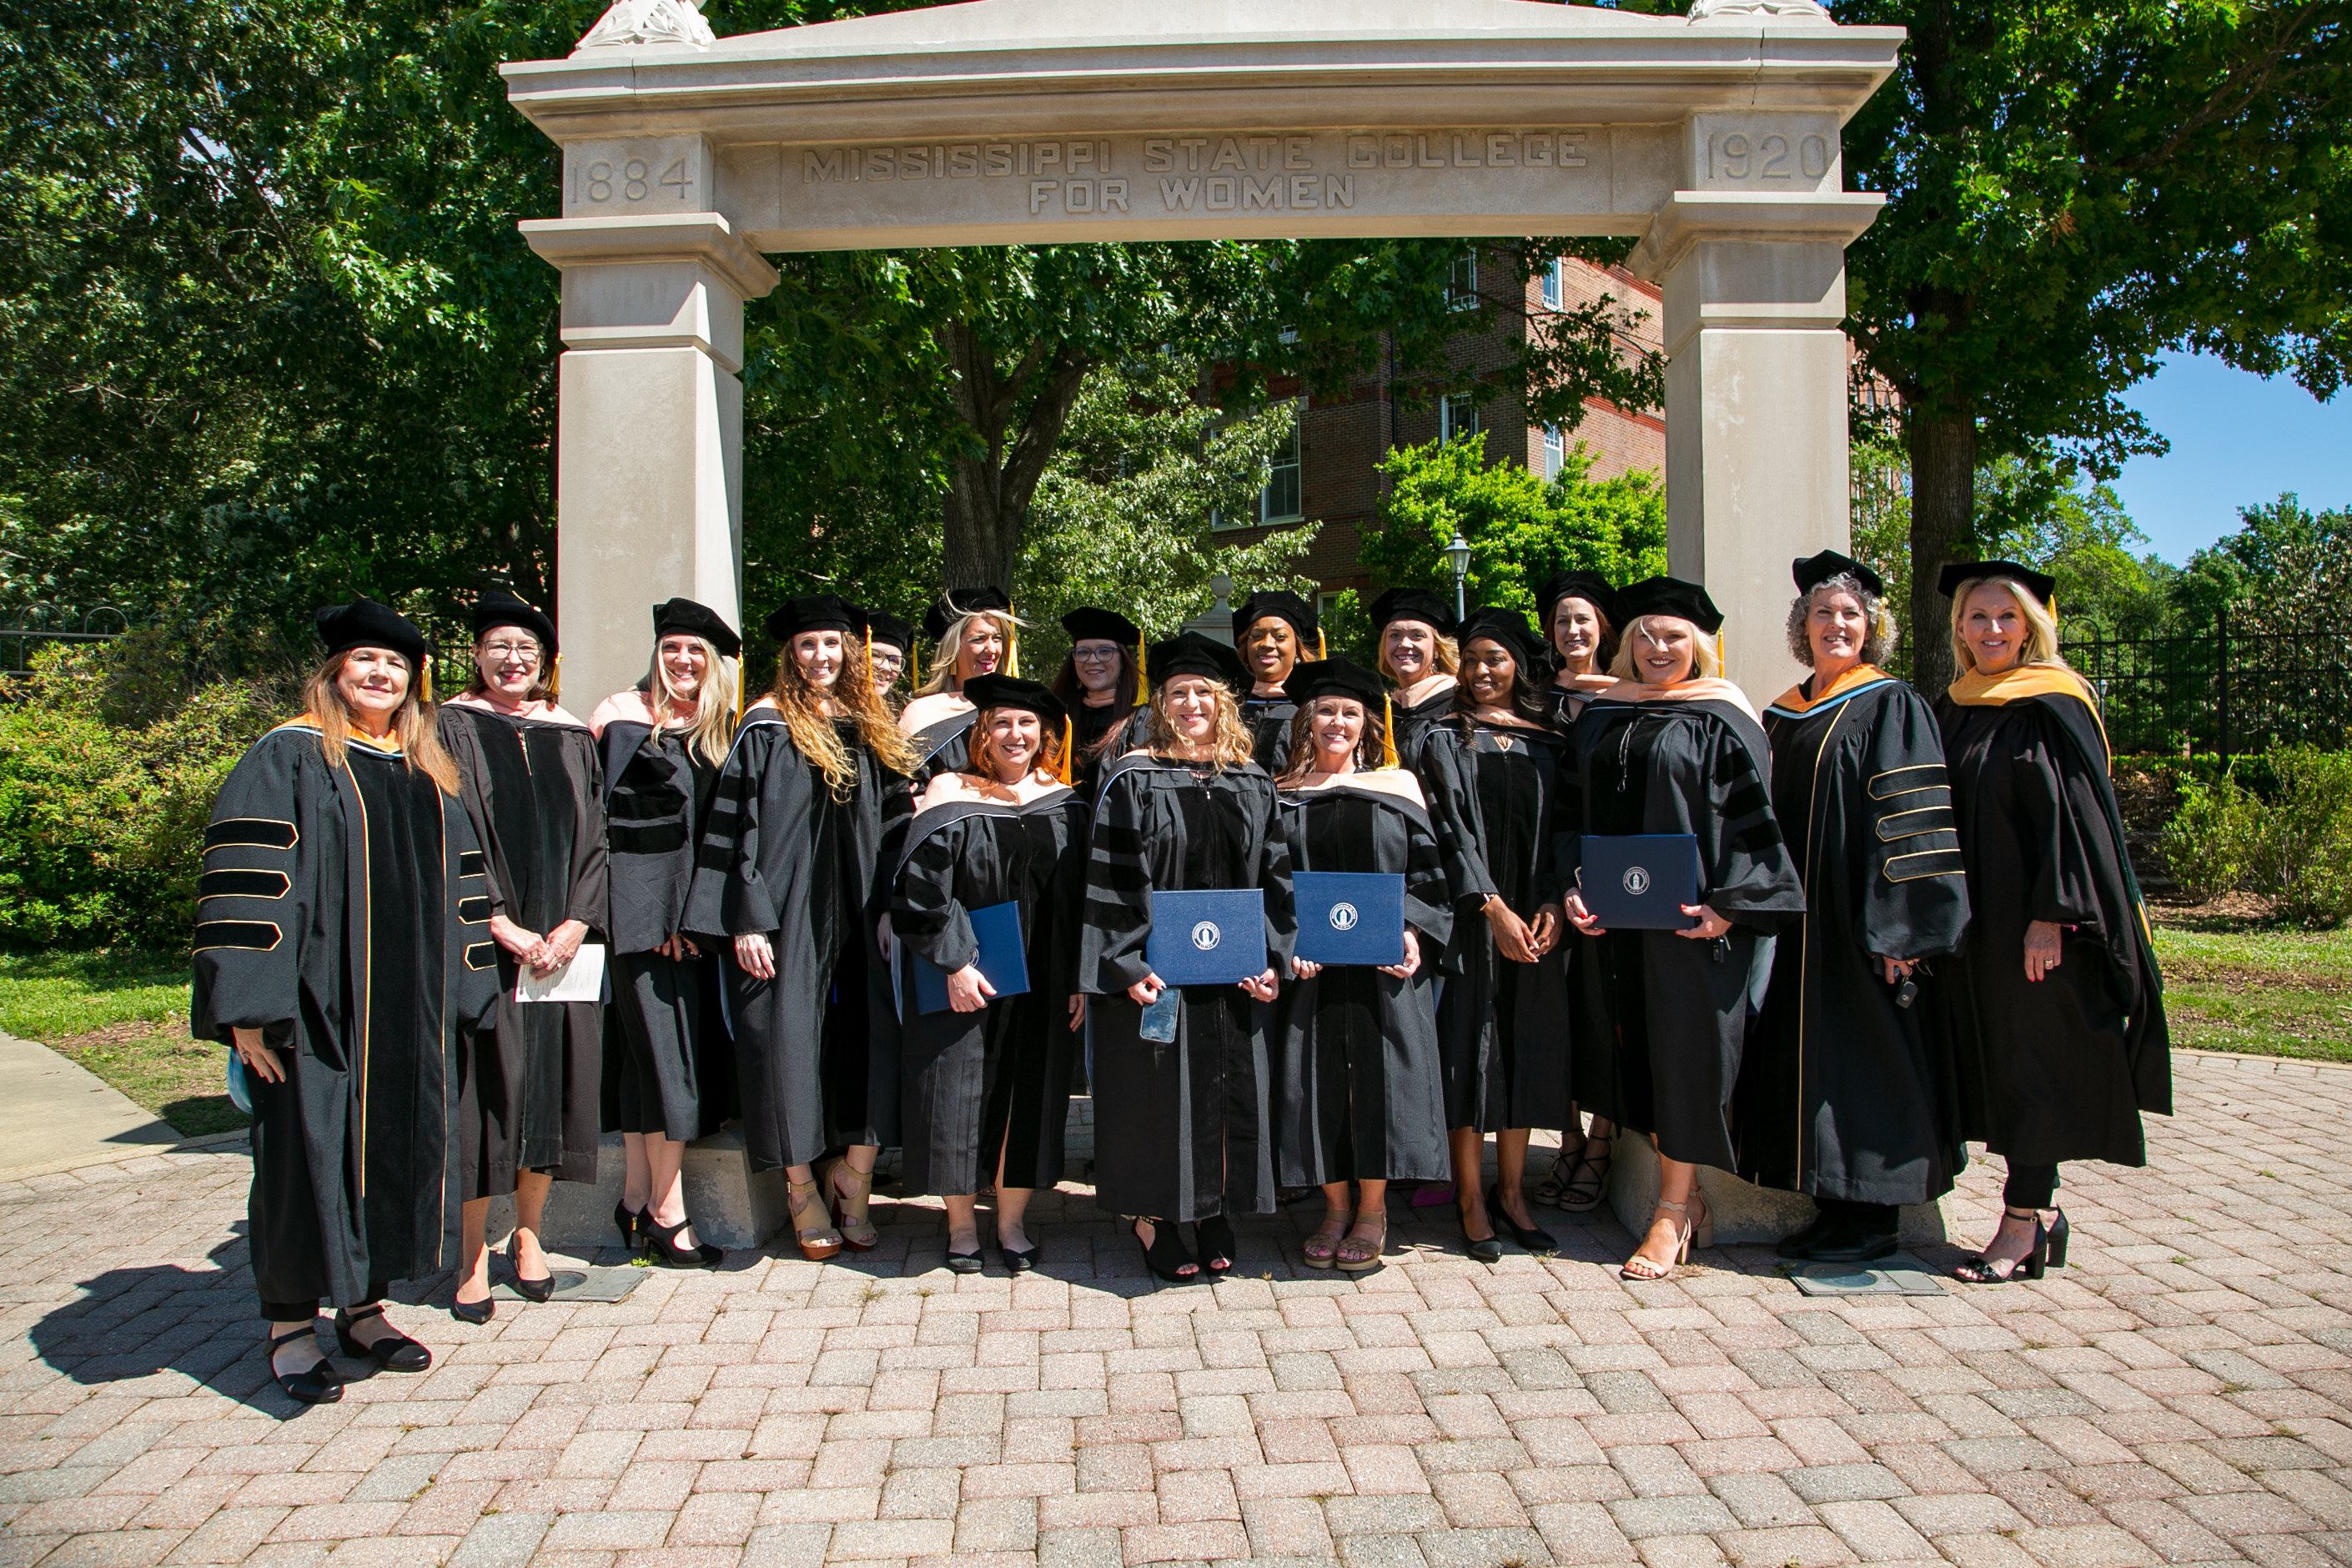 Doctoral class in regalia in front of Old Maid's Gate